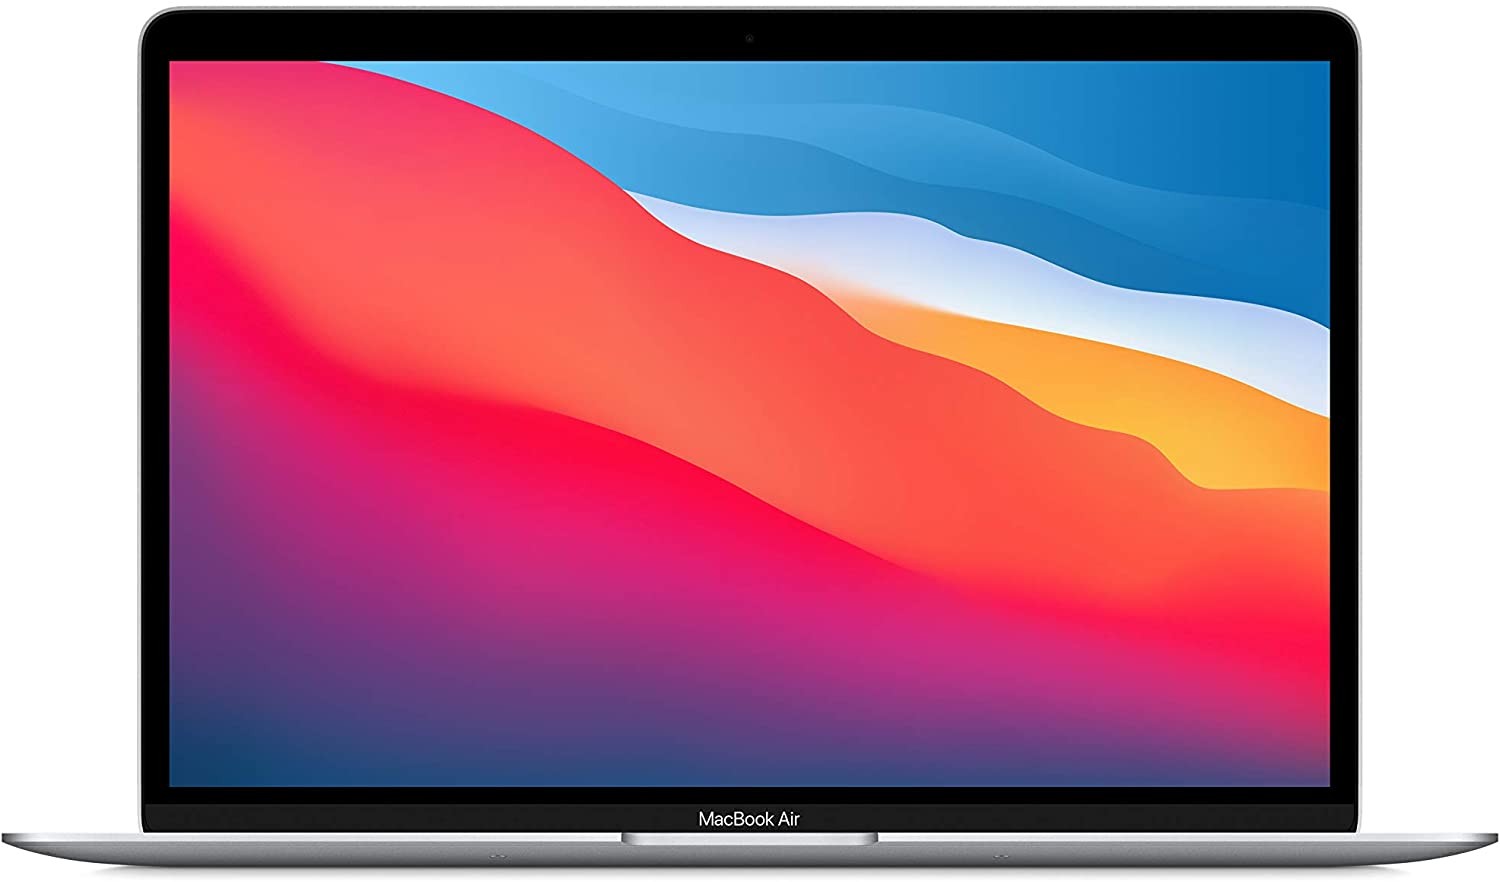 Apple MacBook Air 13.3 inch 2021 Retina M1 chip 8-core CPU with 256GB SSD & Space Gray | MGN63